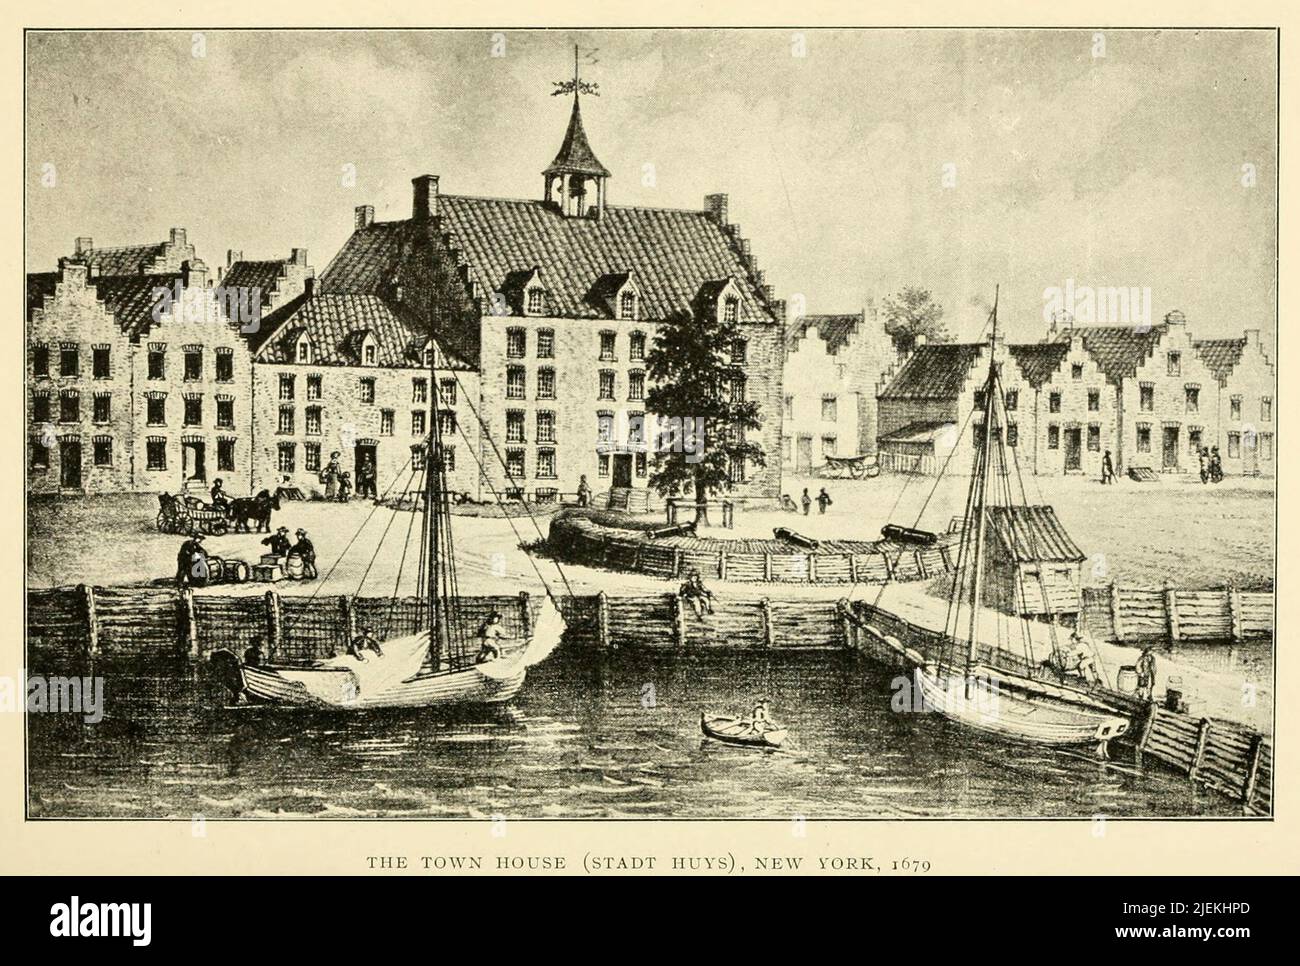 The Town House (Stadt Huys), New York, 1679 Stock Photo